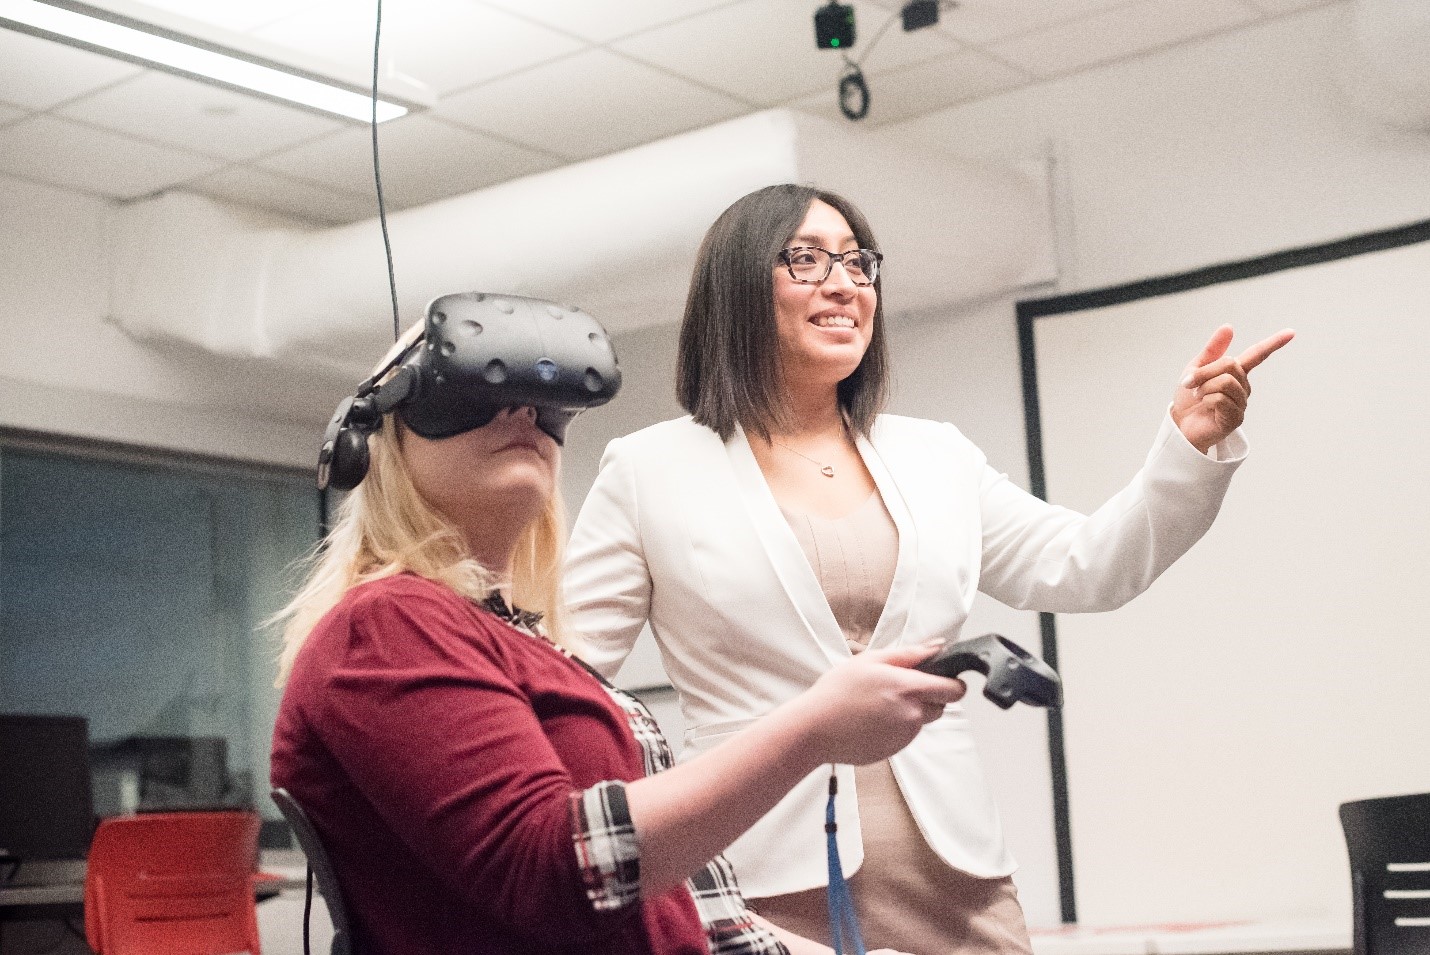 Hernandez and Fast co-authored a study to examine whether a VR positive psychological intervention called JovialityTM, would help hemodialisys patients during treatment.